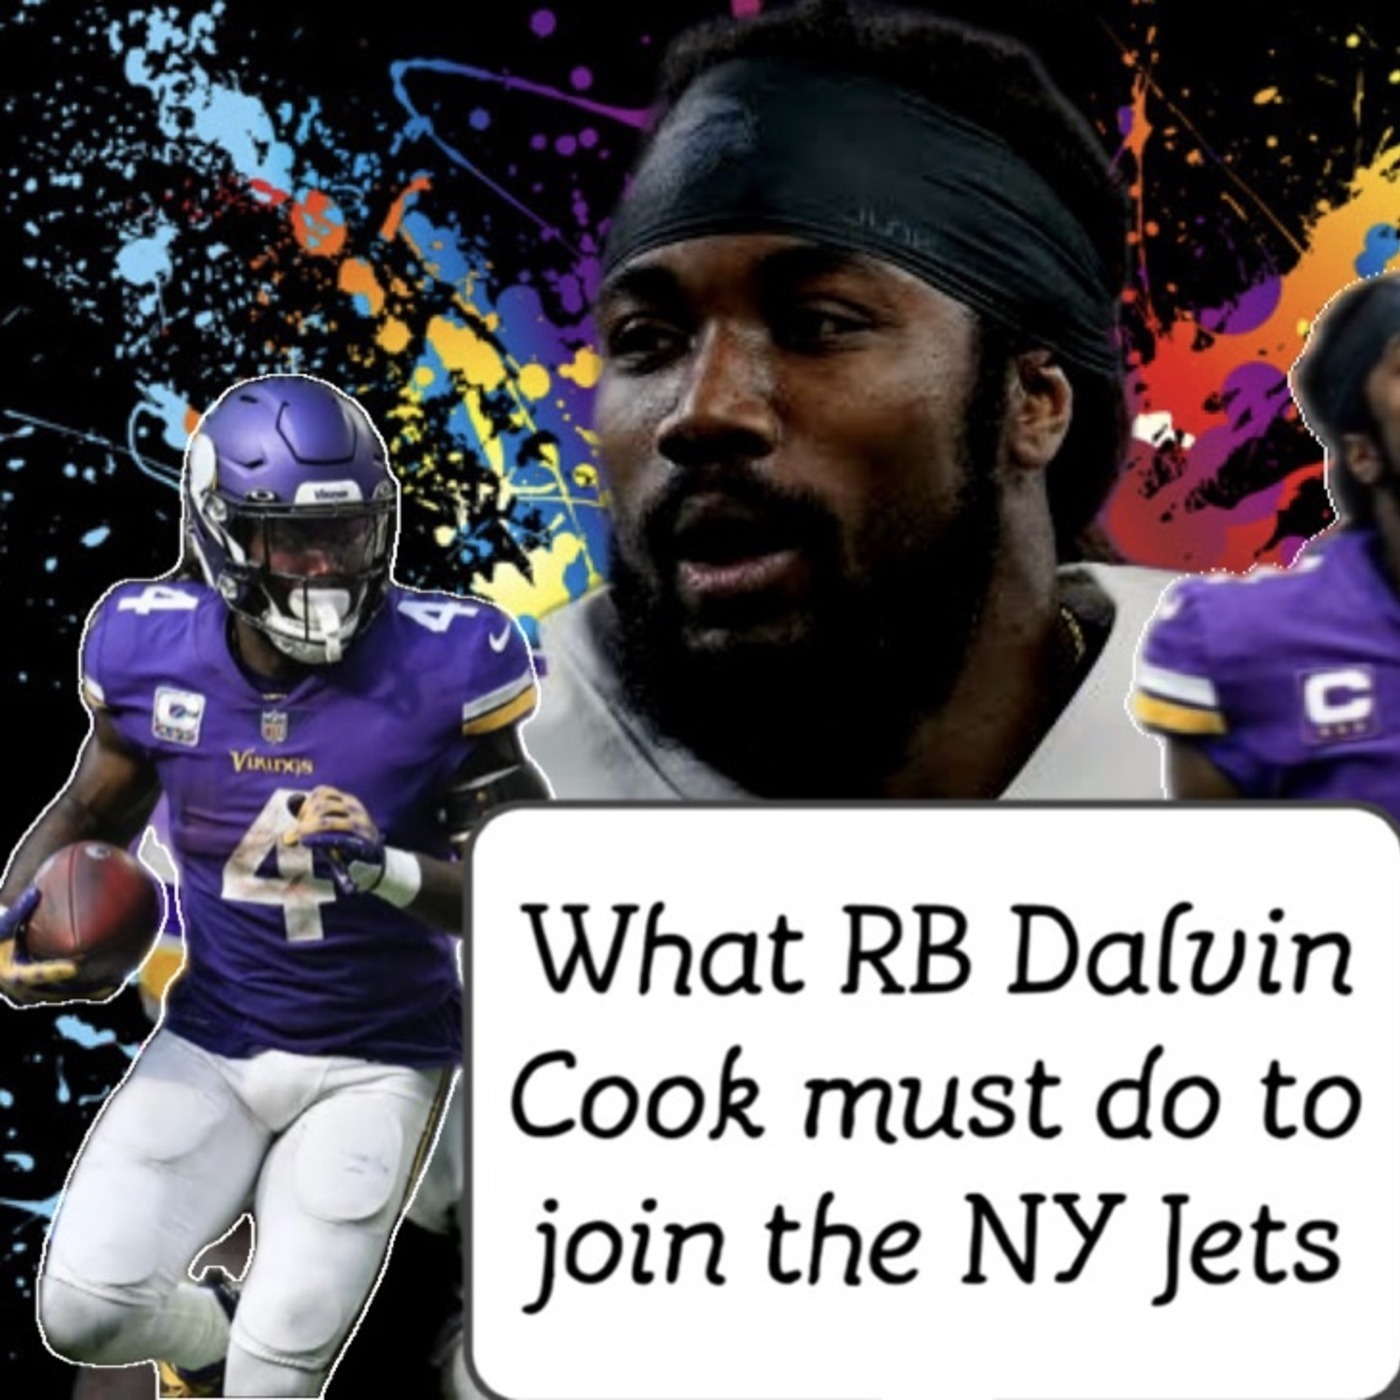 UND s3e6: Insider: 2 things Dalvin Cook must do to join the Jets